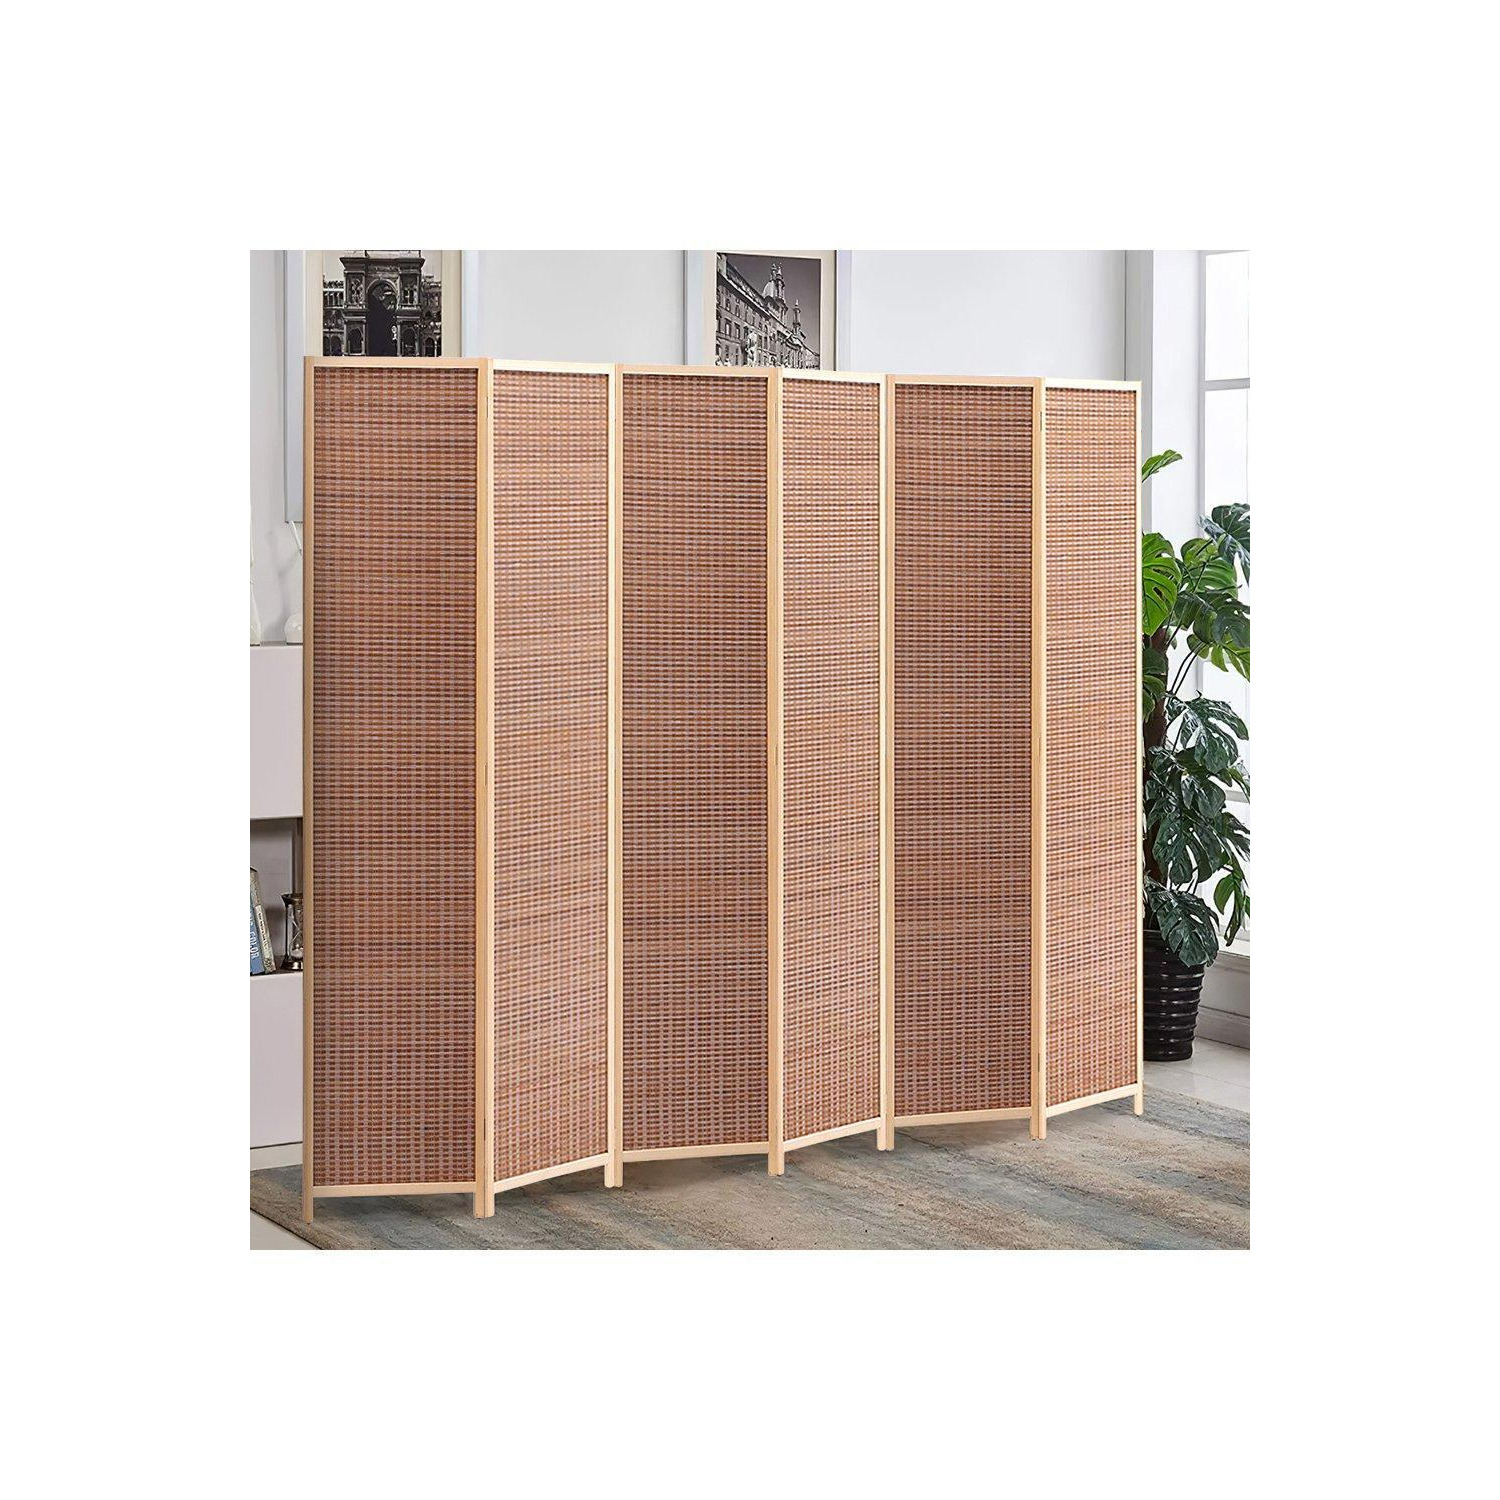 6-Panel Bamboo Woven Folding Room Divider - image 1